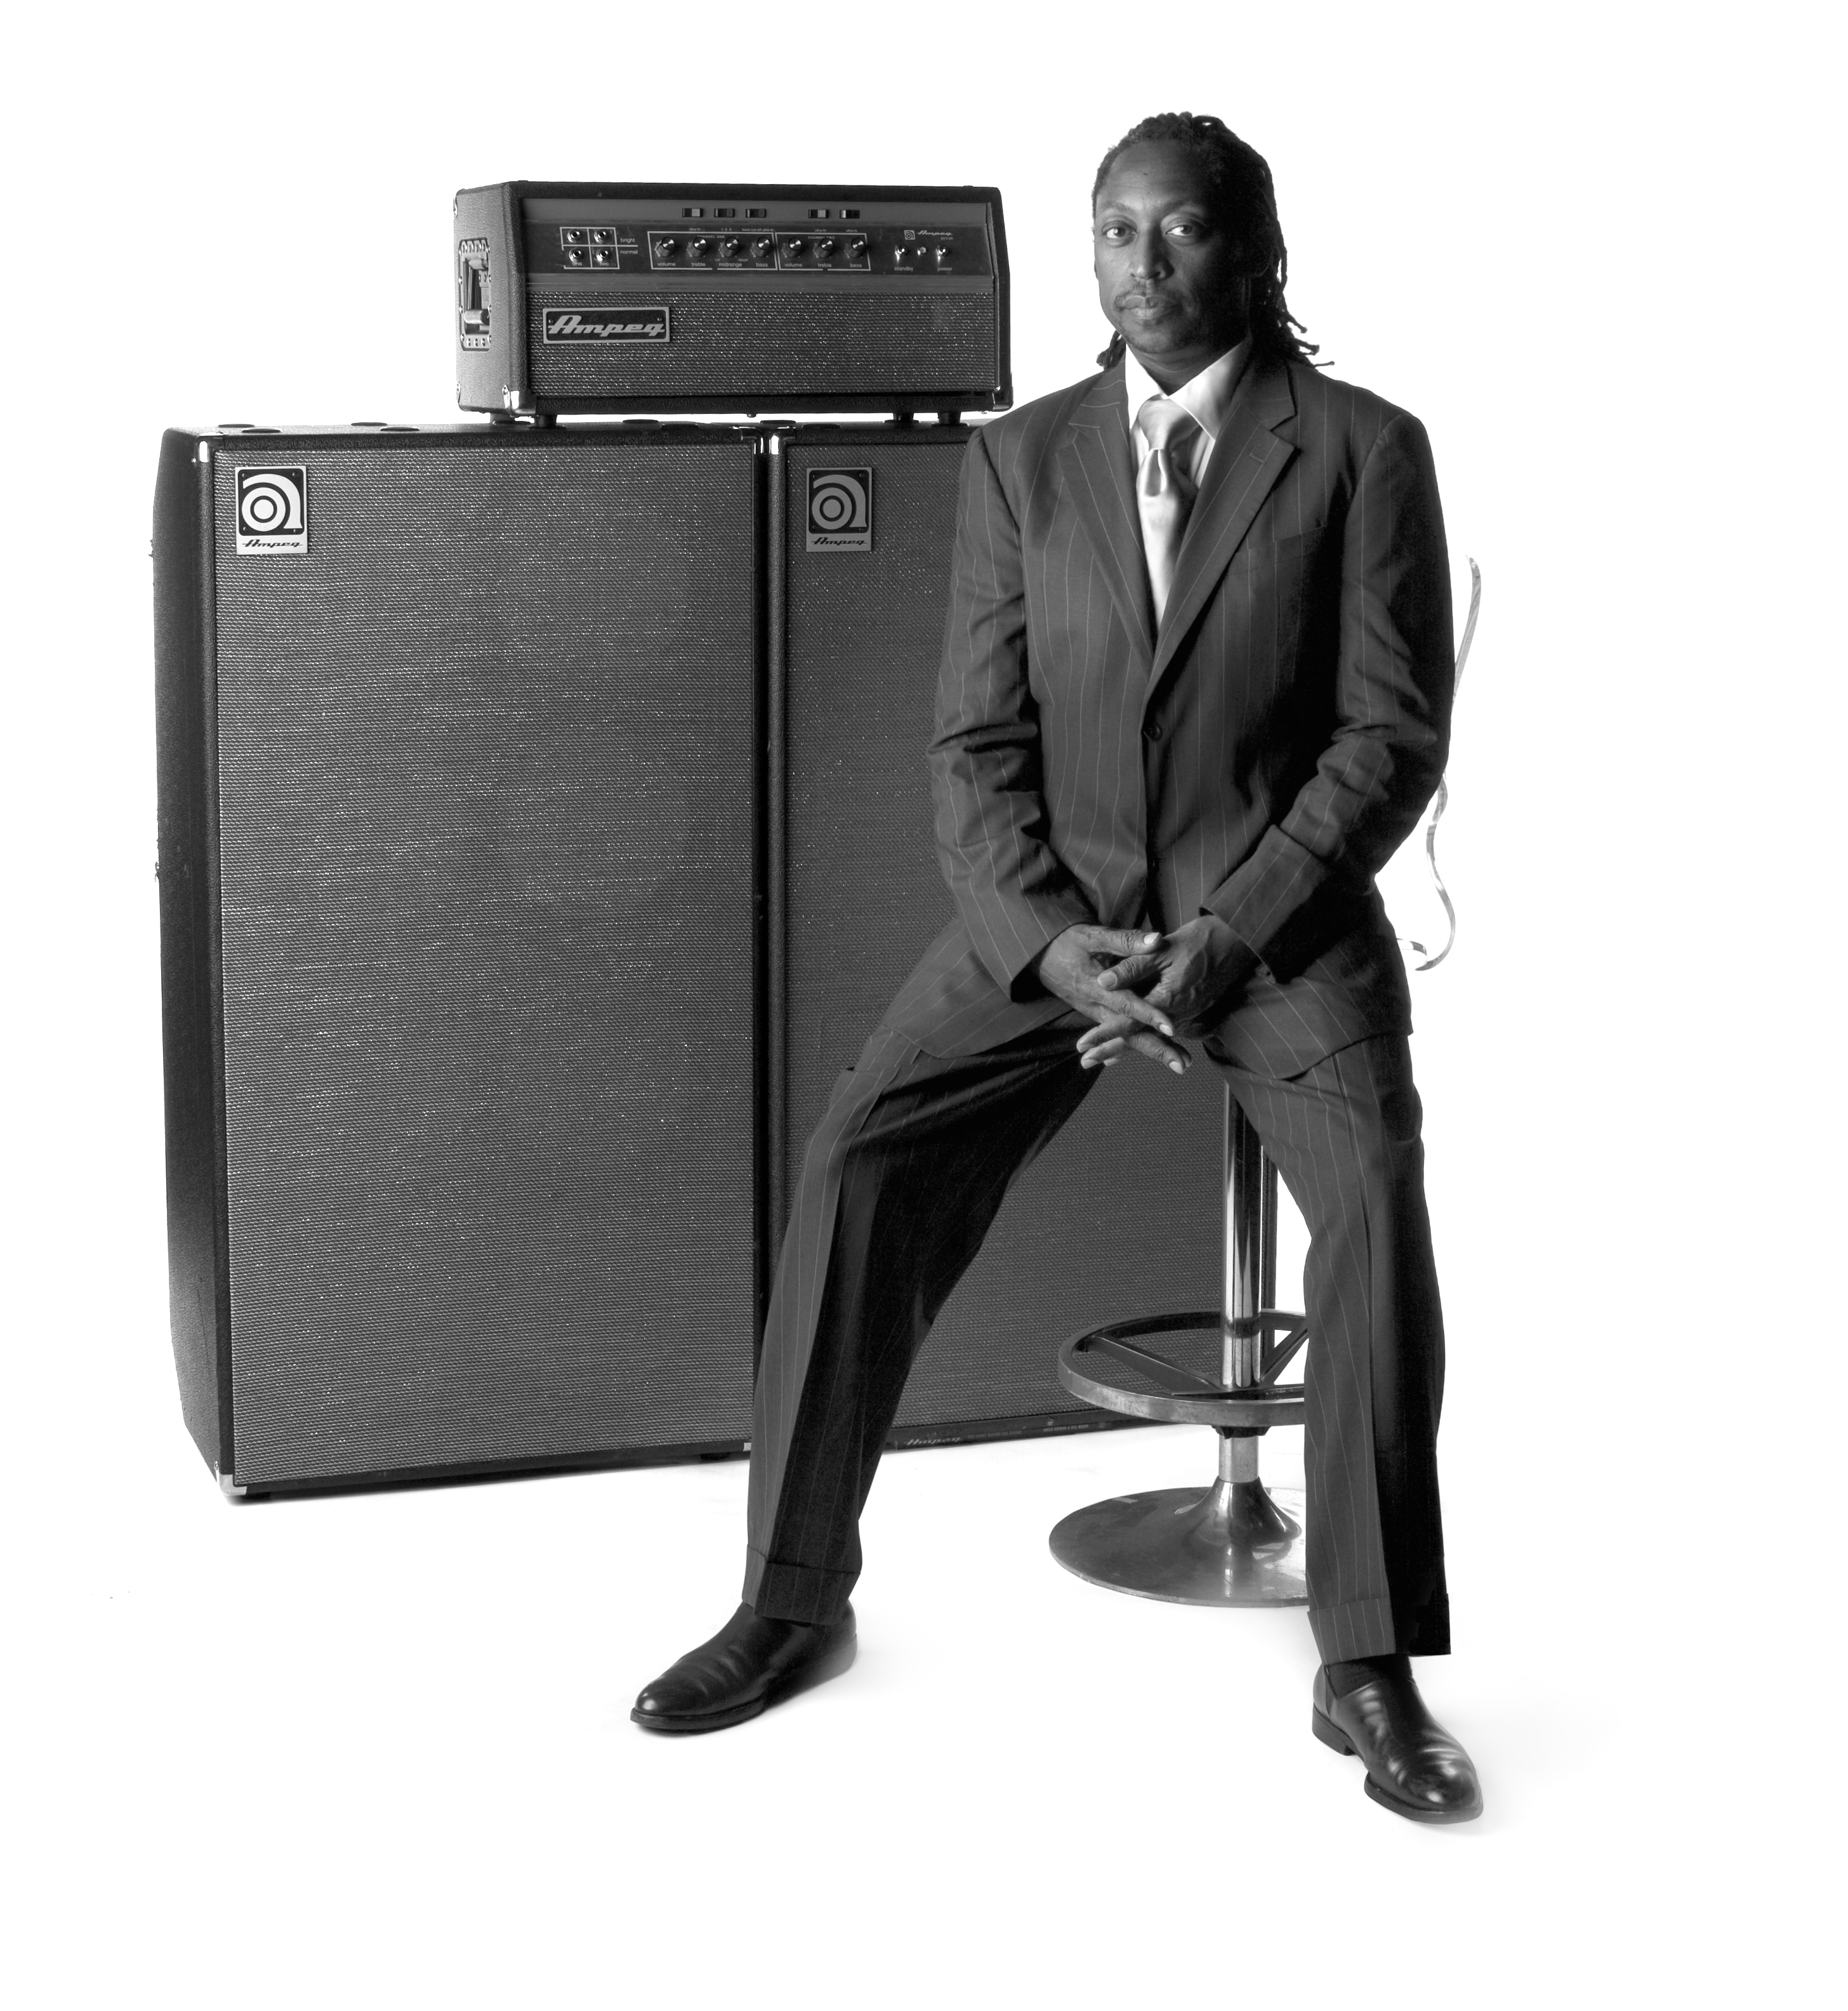 Darryl Jones sitting on a chair in front of Ampeg stack